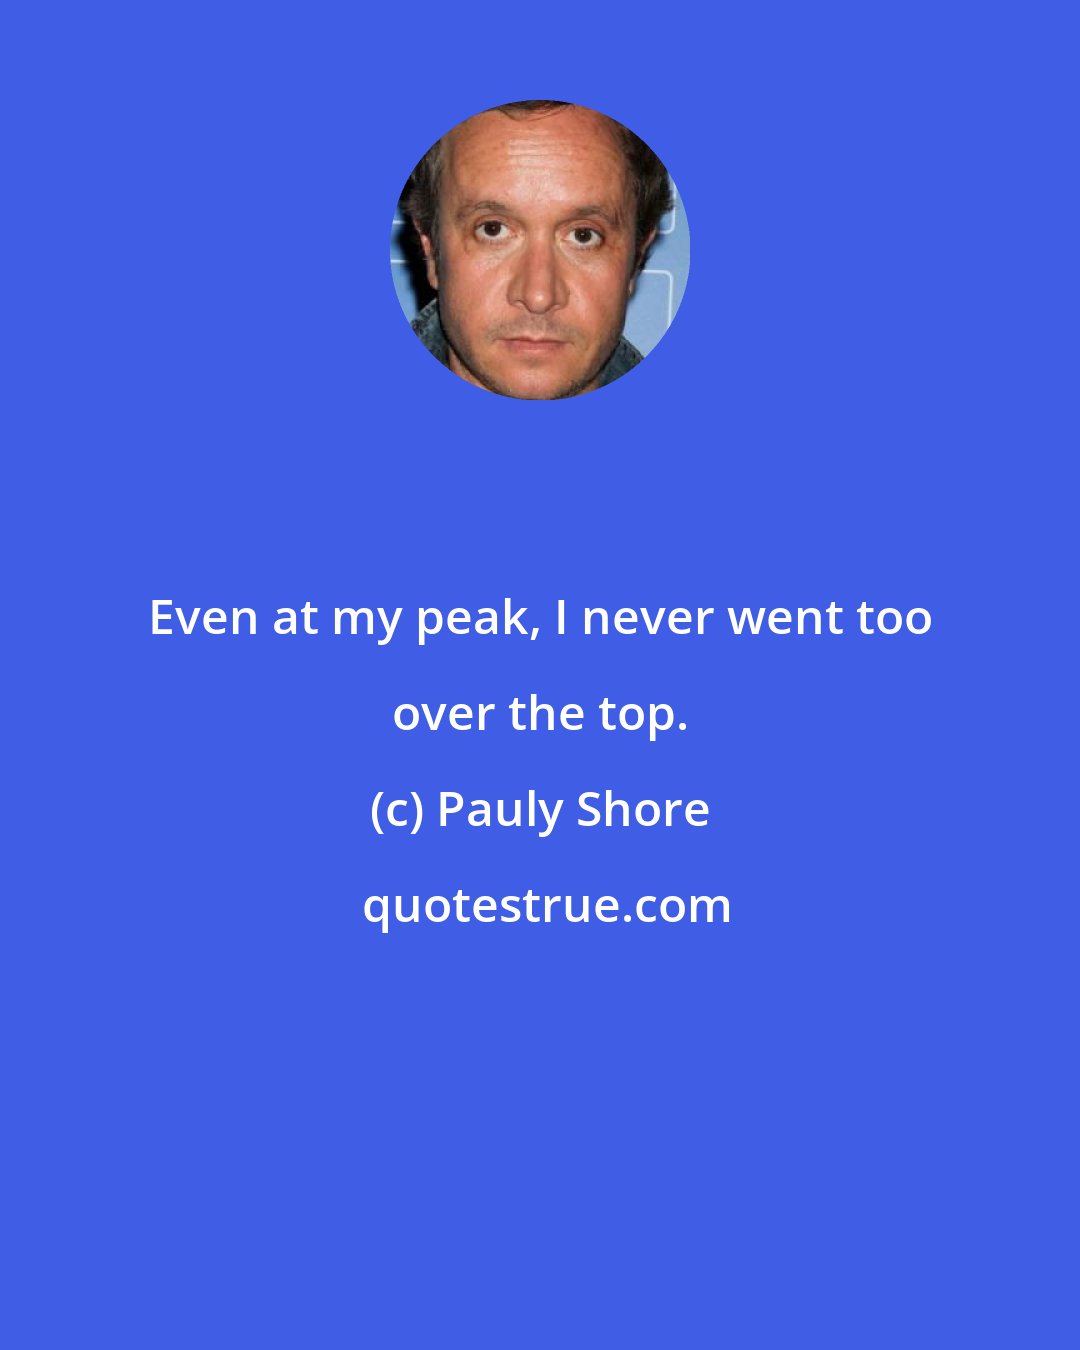 Pauly Shore: Even at my peak, I never went too over the top.